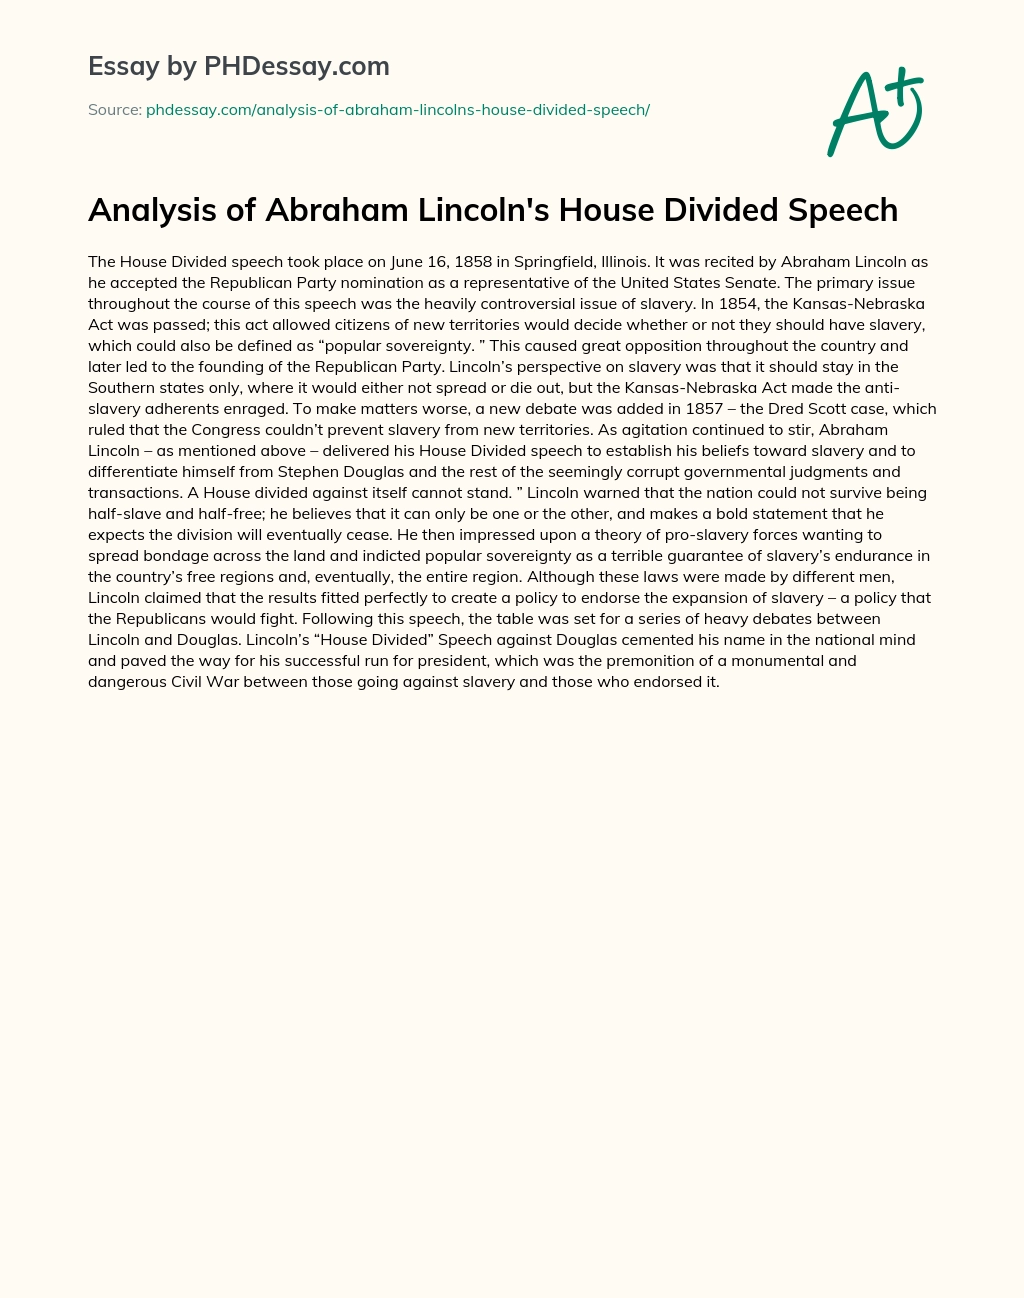 Analysis of Abraham Lincoln’s House Divided Speech essay